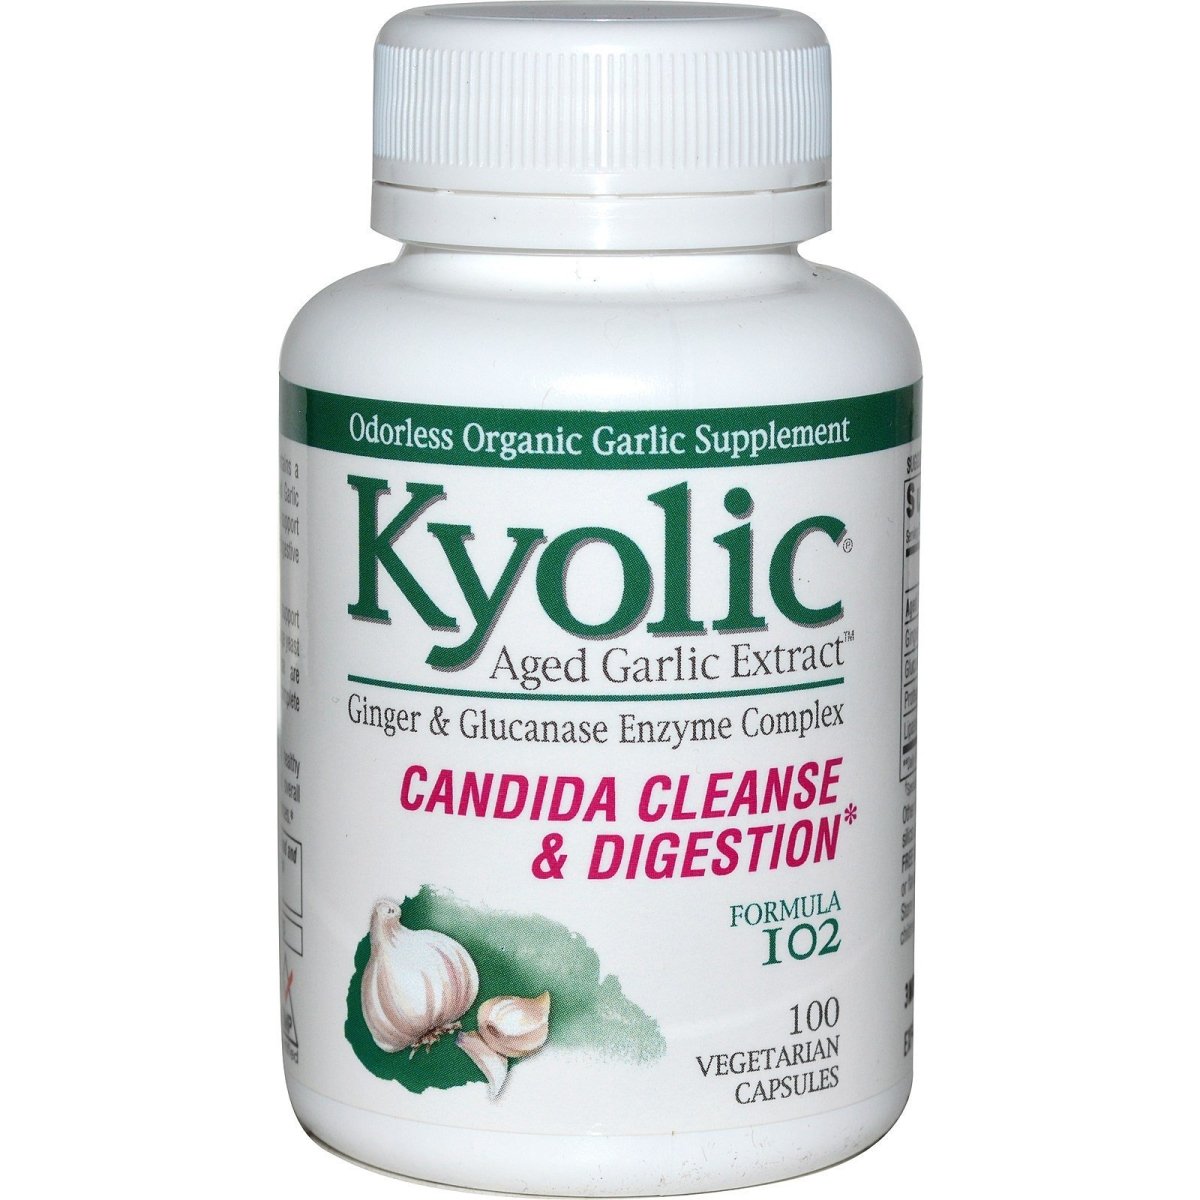 Candida Cleanse and Digestion - Formula 102 - 100 Vegetarian Capsules